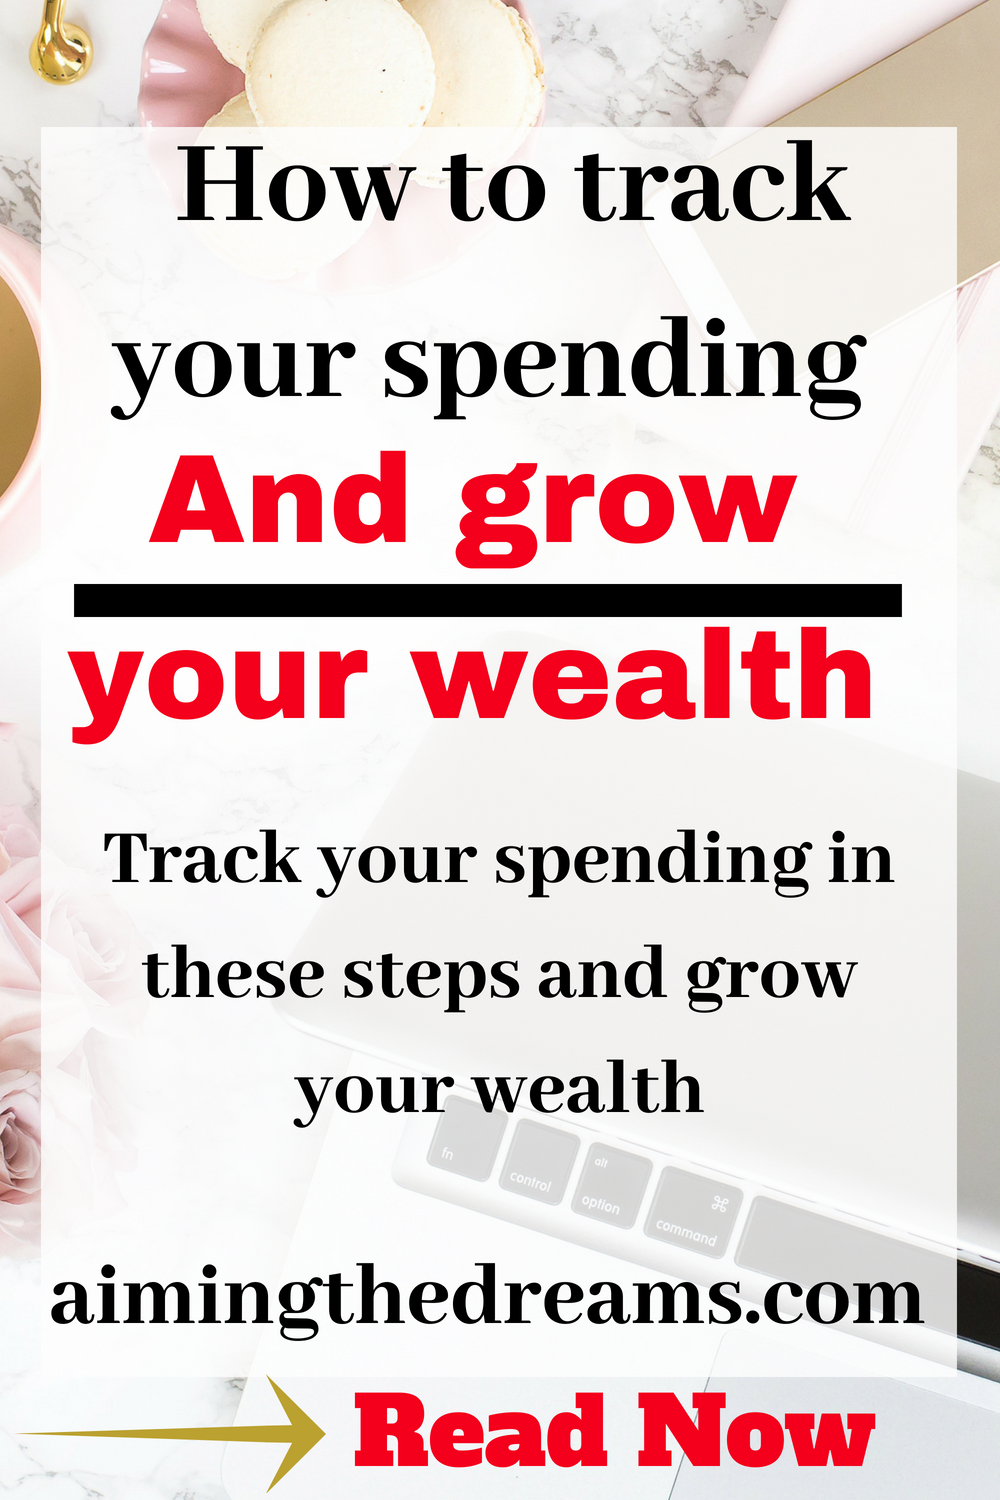 Grow your wealth by tracking your spending. Saving money becomes easy after you know here you are spending your money. 